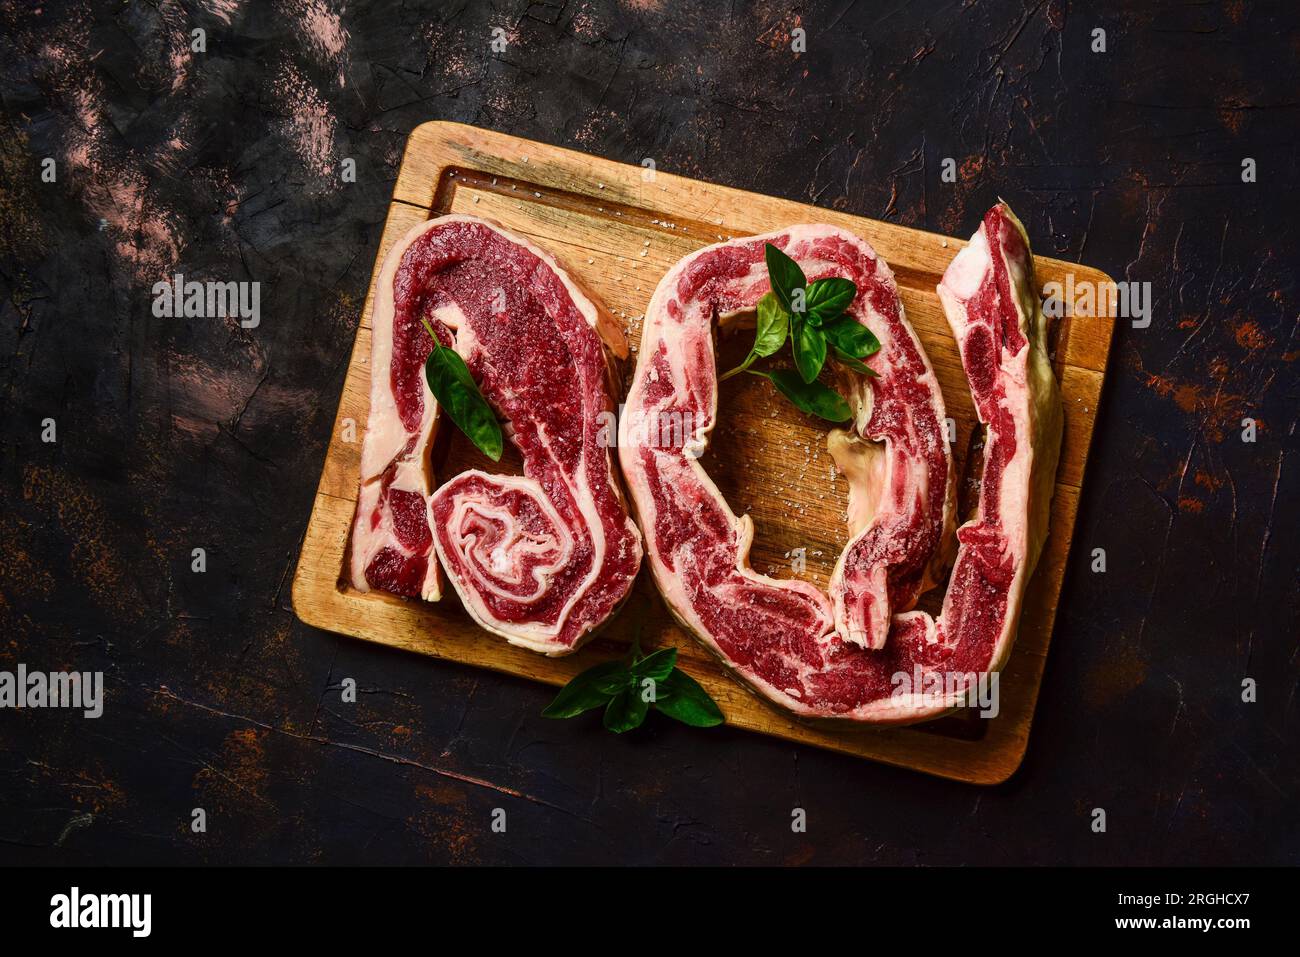 Cattle Beef ribs prepared on the table Stock Photo